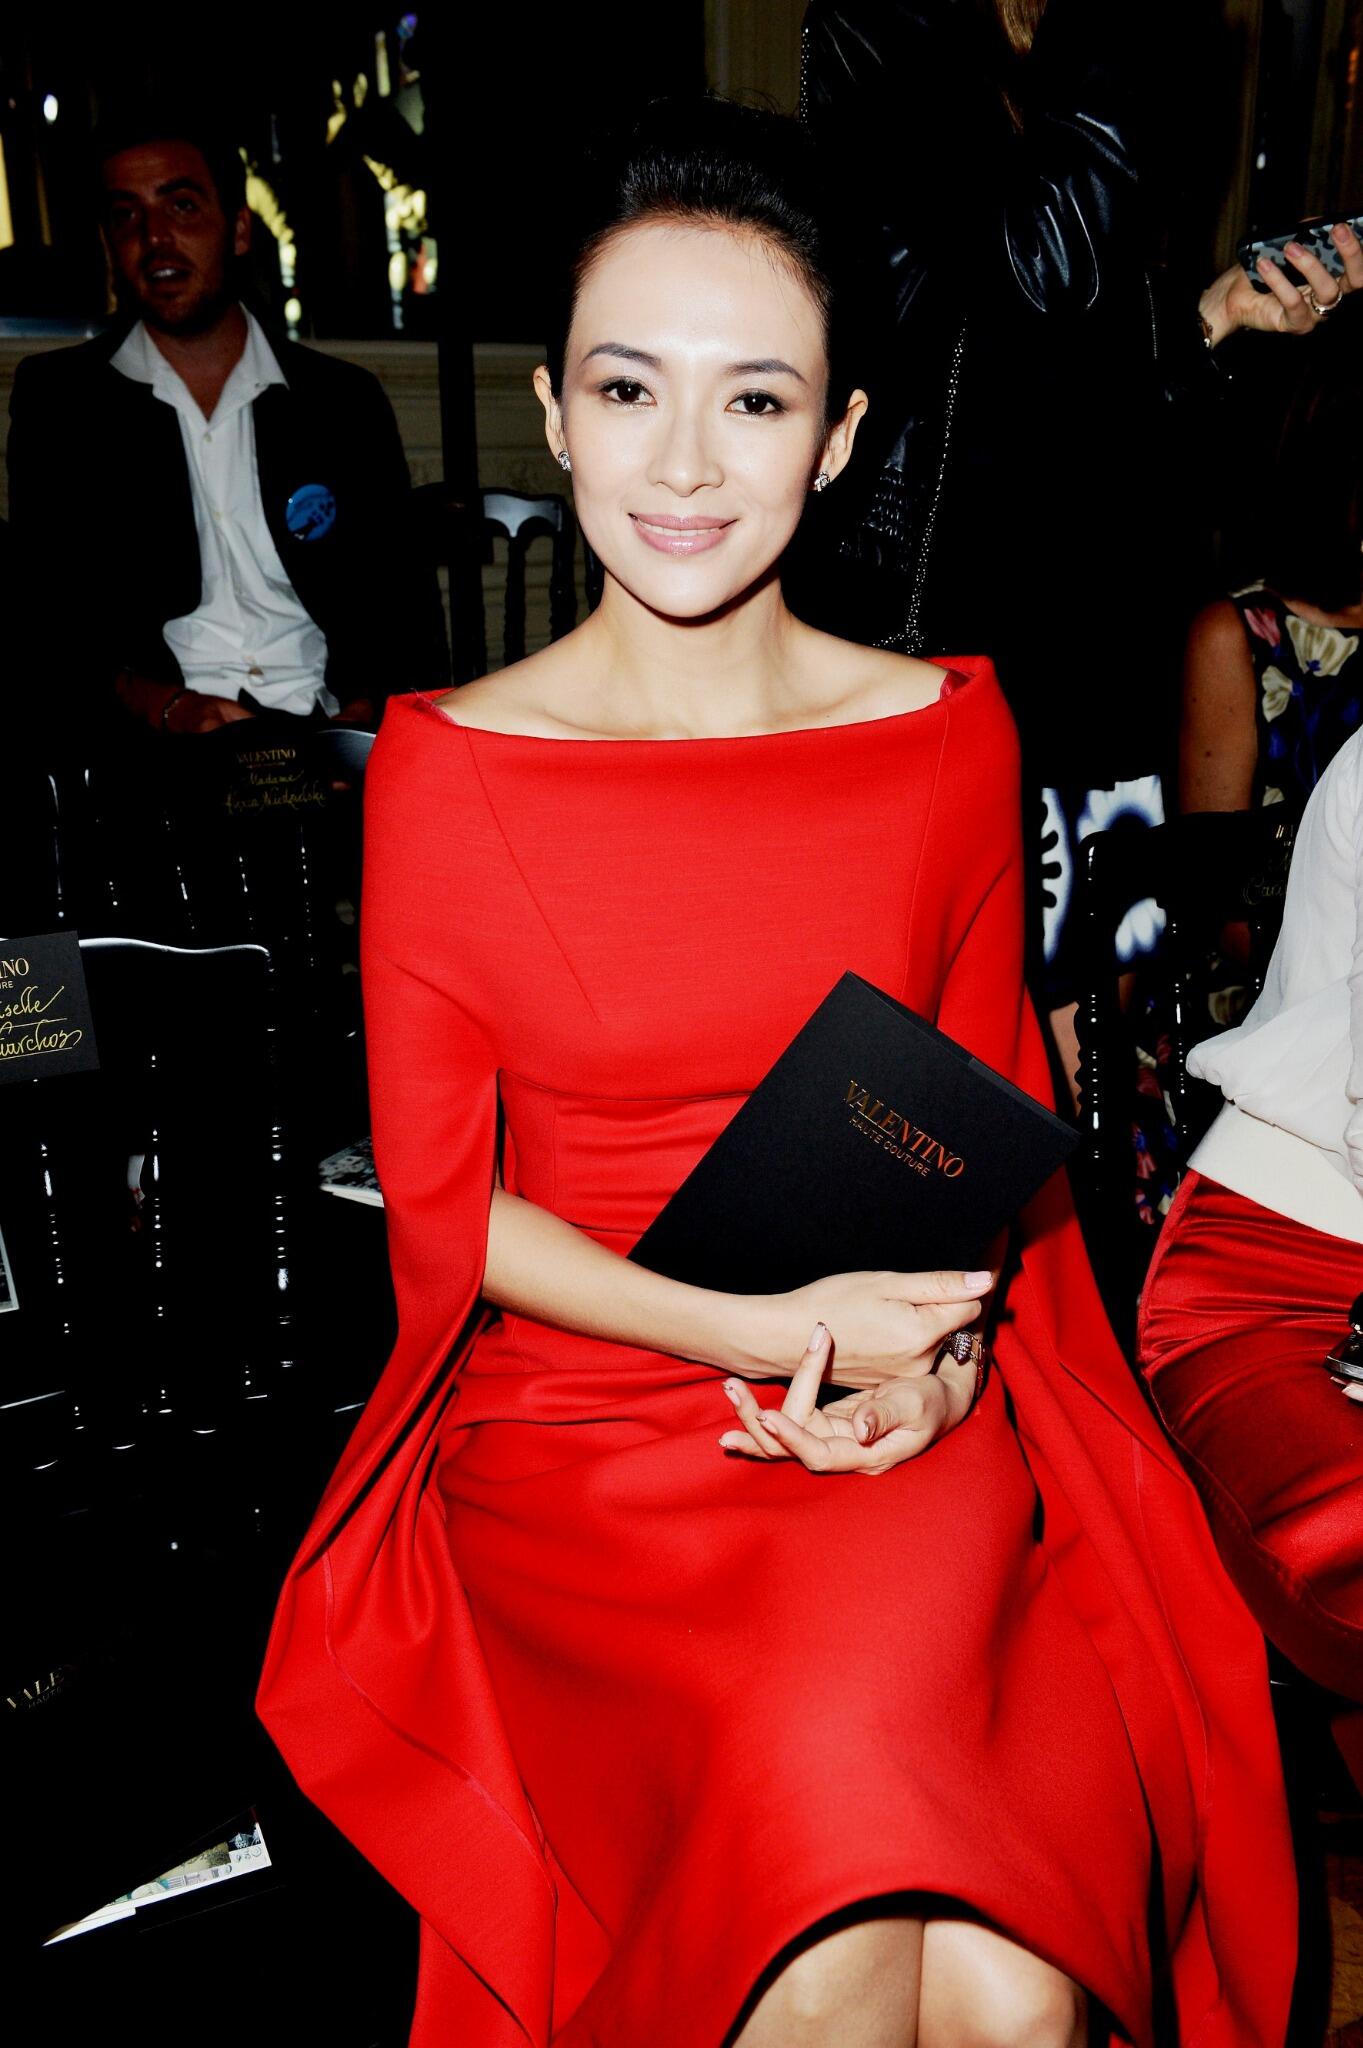 Valentino on Twitter: "At the HC FW 13/14 Show Zhang Ziyi looked radiant in this red dress from HC SS 13 collection http://t.co/ZbHJp2hlVW" / Twitter